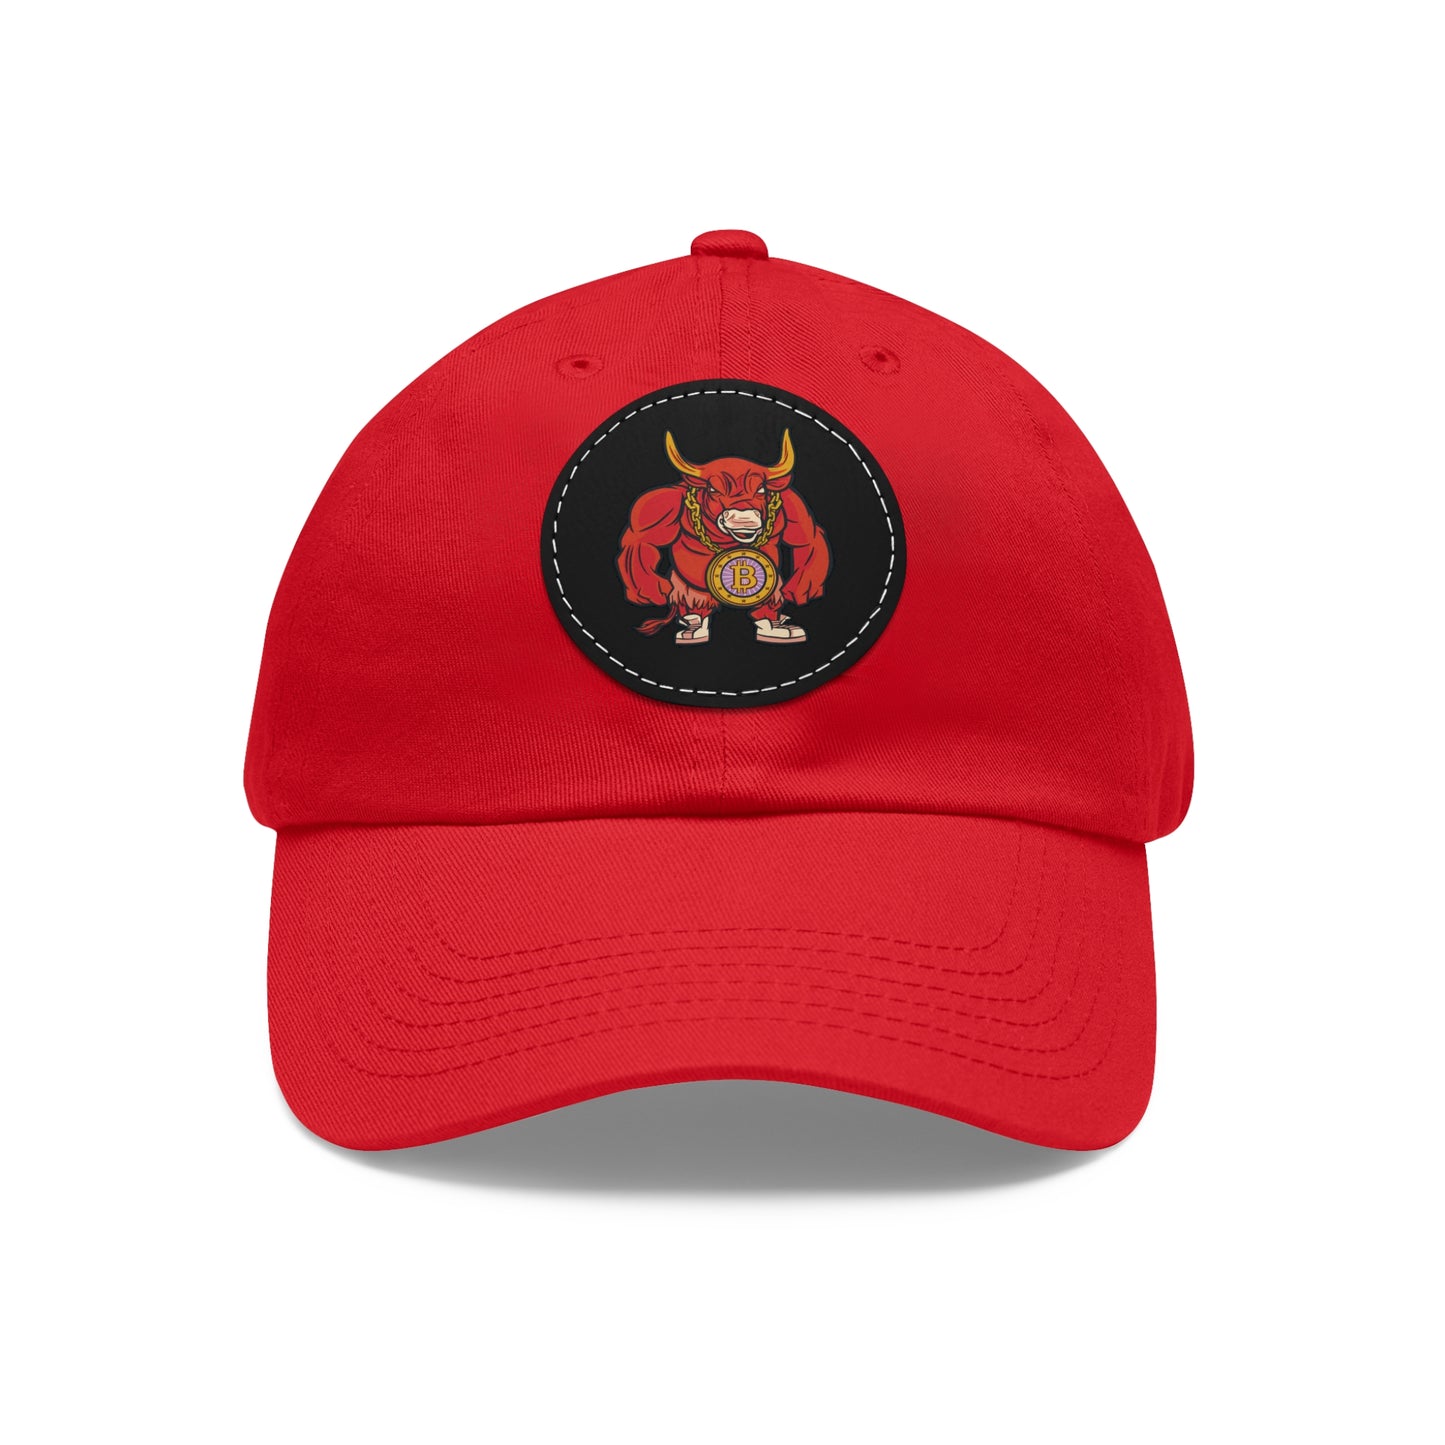 Bitcoin Bull Hat with Leather Patch (Round)